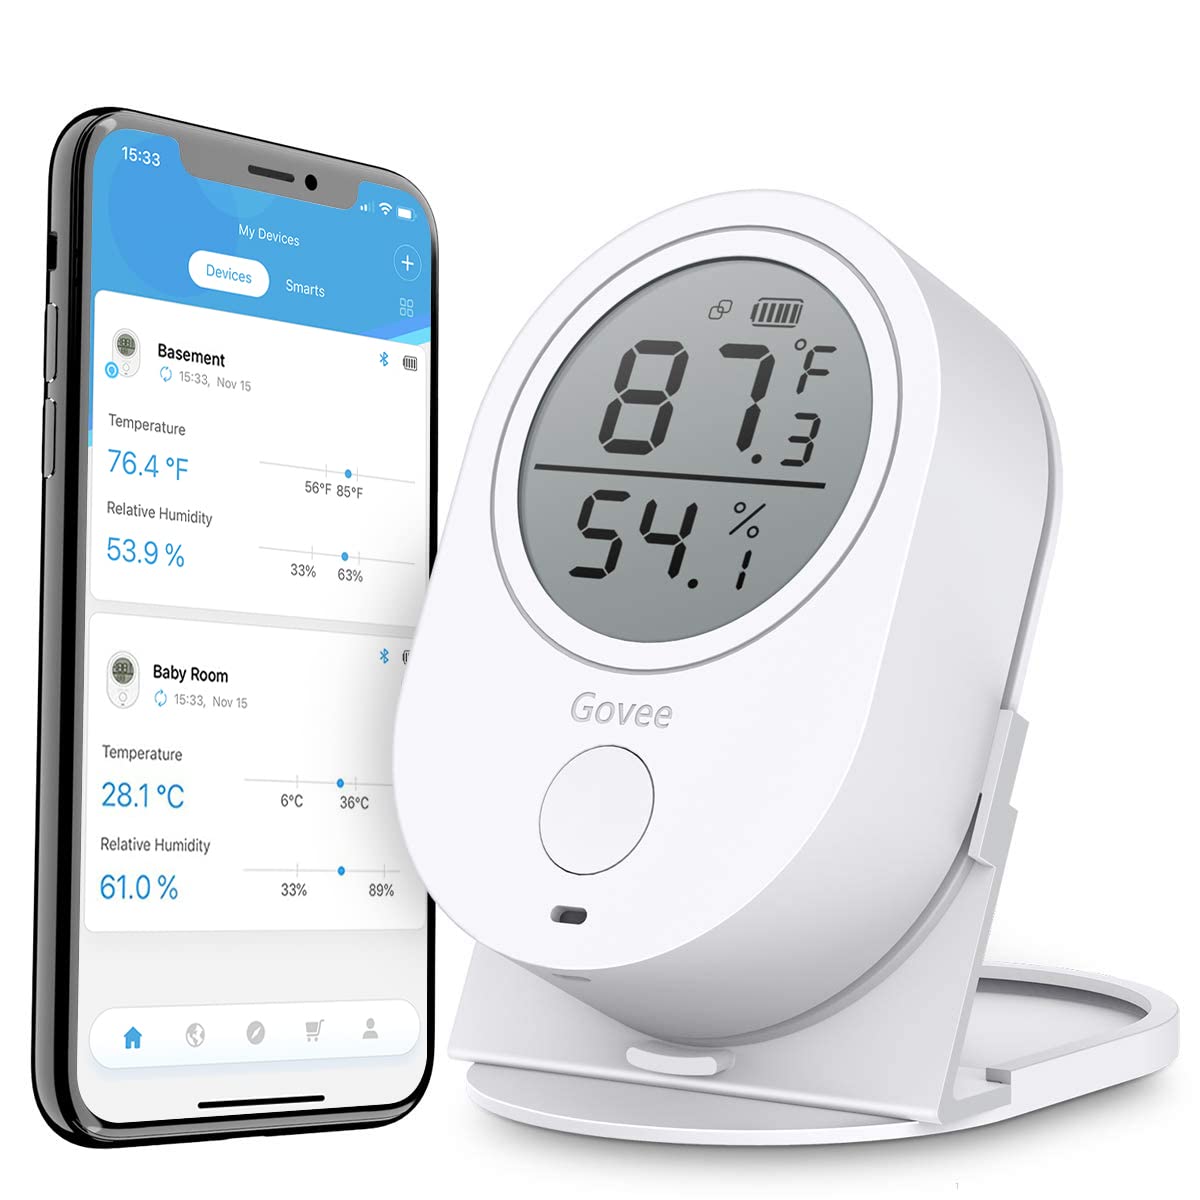 30% off Govee Indoor Digital Bluetooth Thermometer Hygrometer with APP Alert, 2 Year Data Record and Export-$12.59+ FS with PRIME